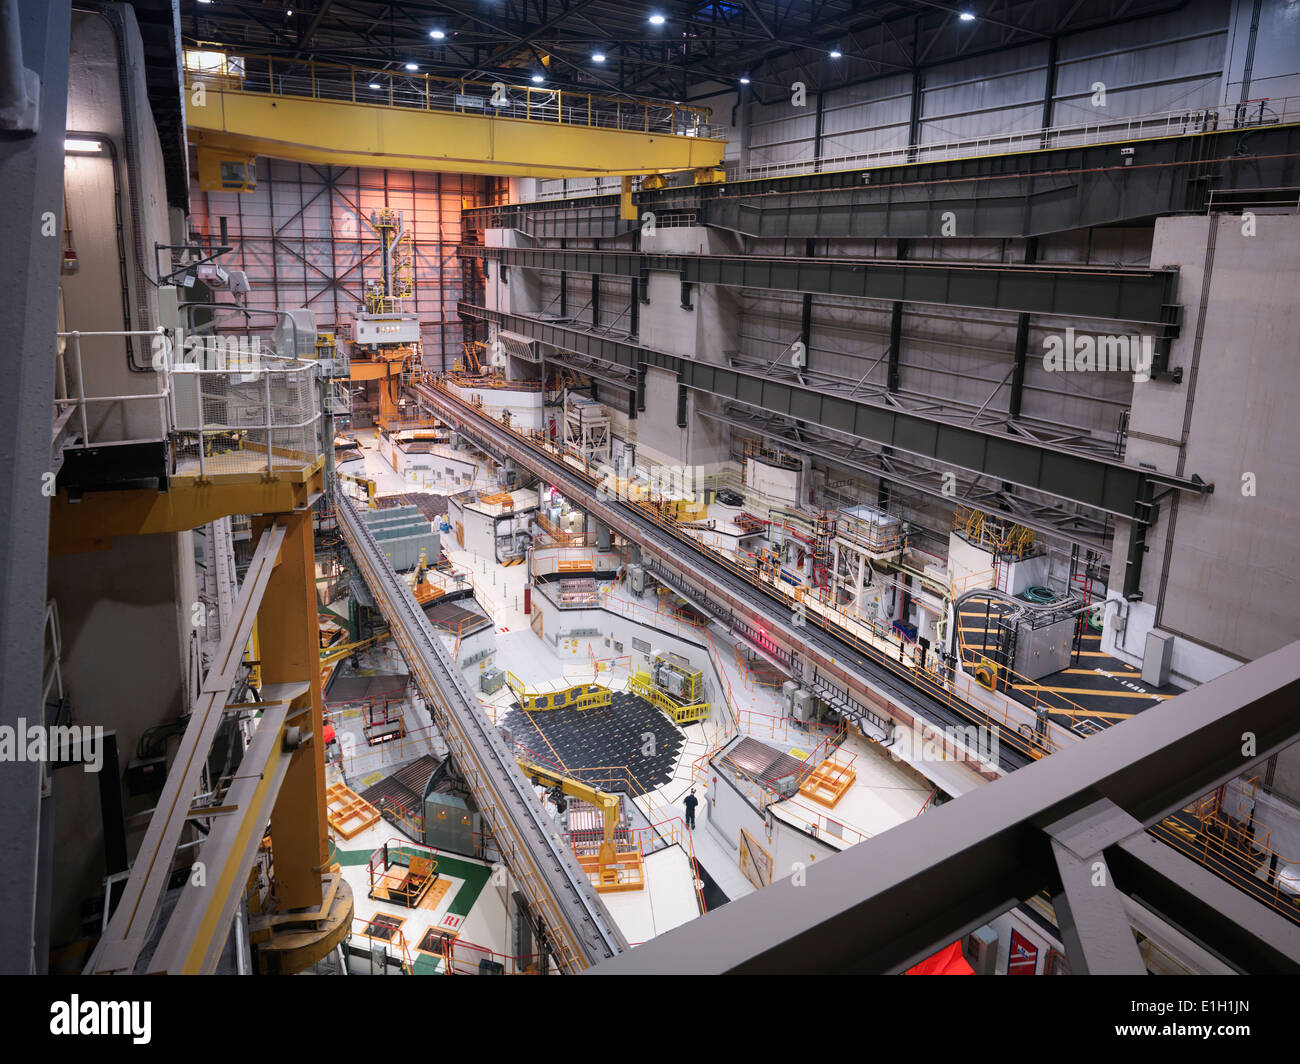 Reactor hall in nuclear power station, high angle view Stock Photo